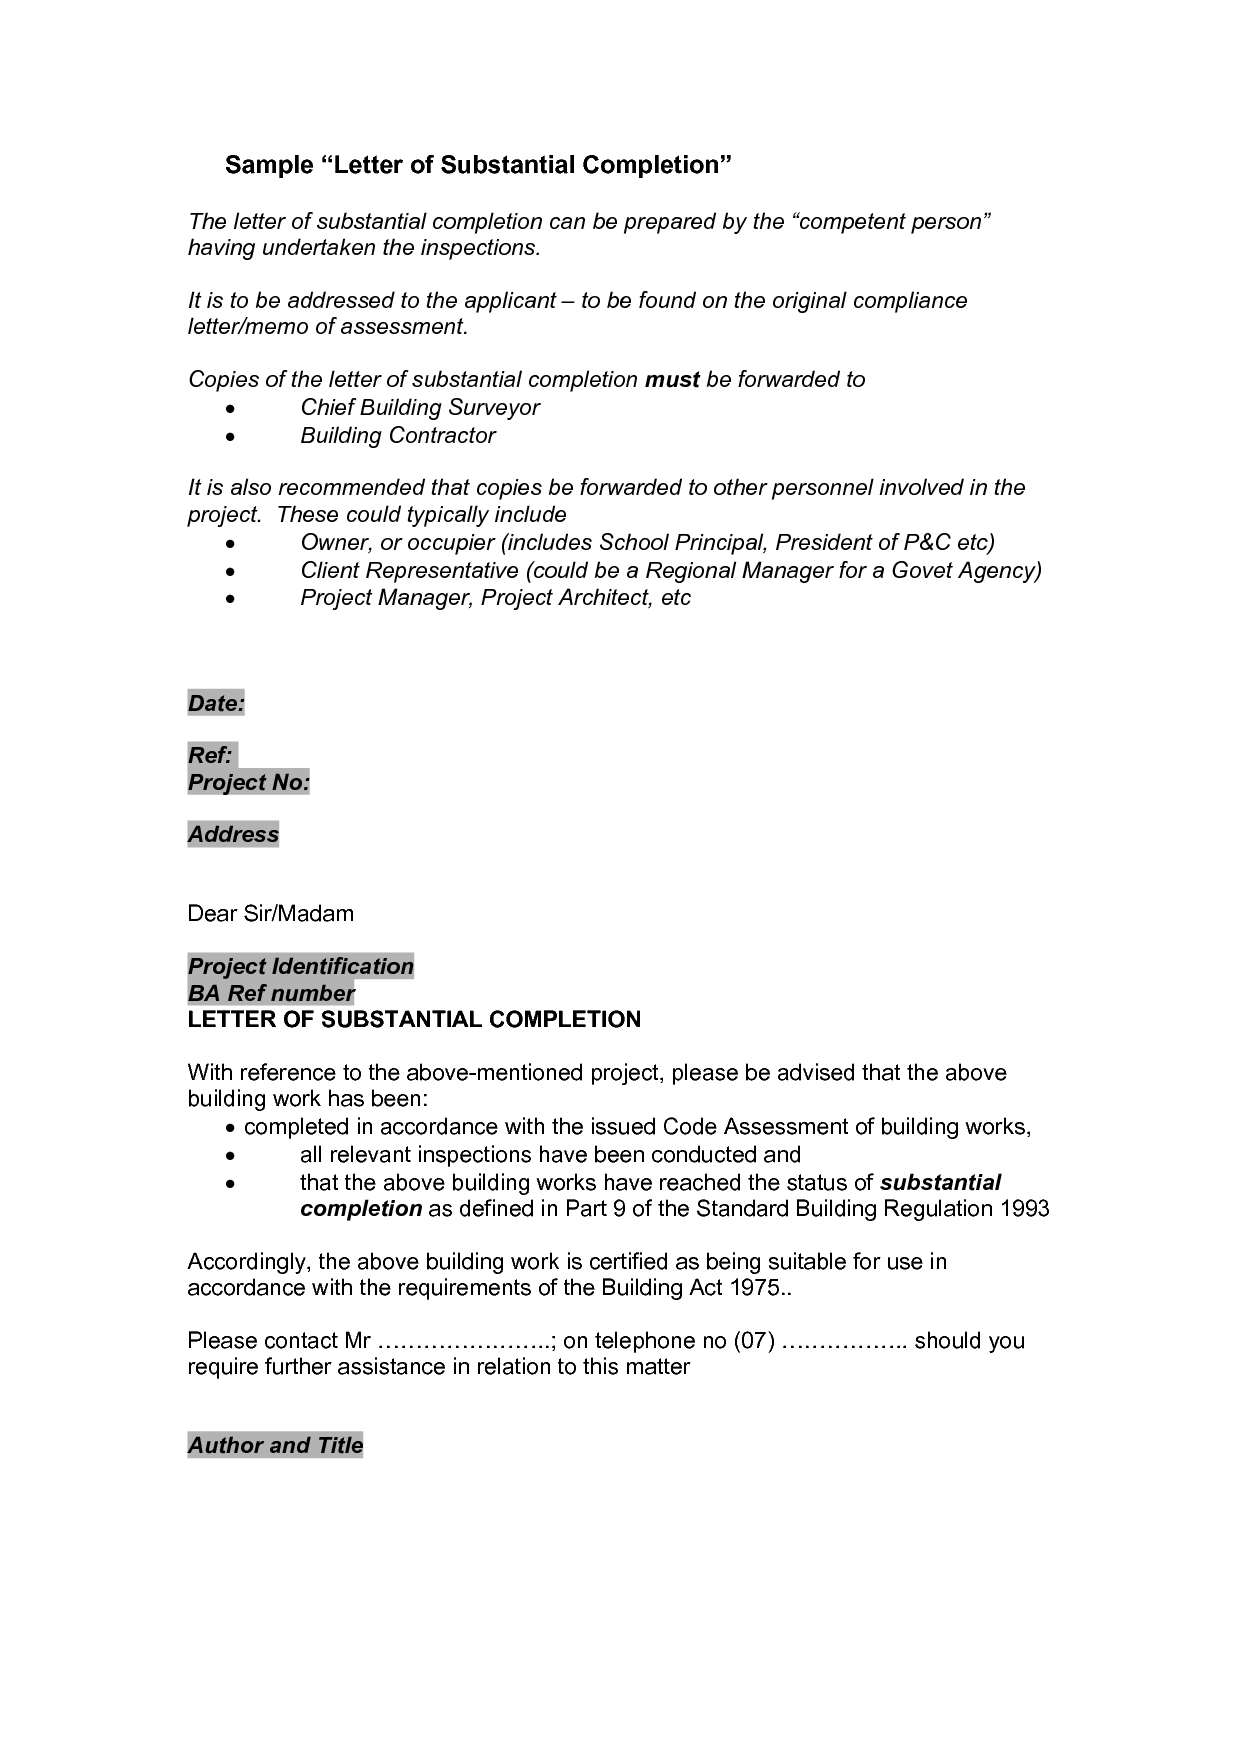 Certification Certificate Completion Construction Letter Regarding Construction Certificate Of Completion Template